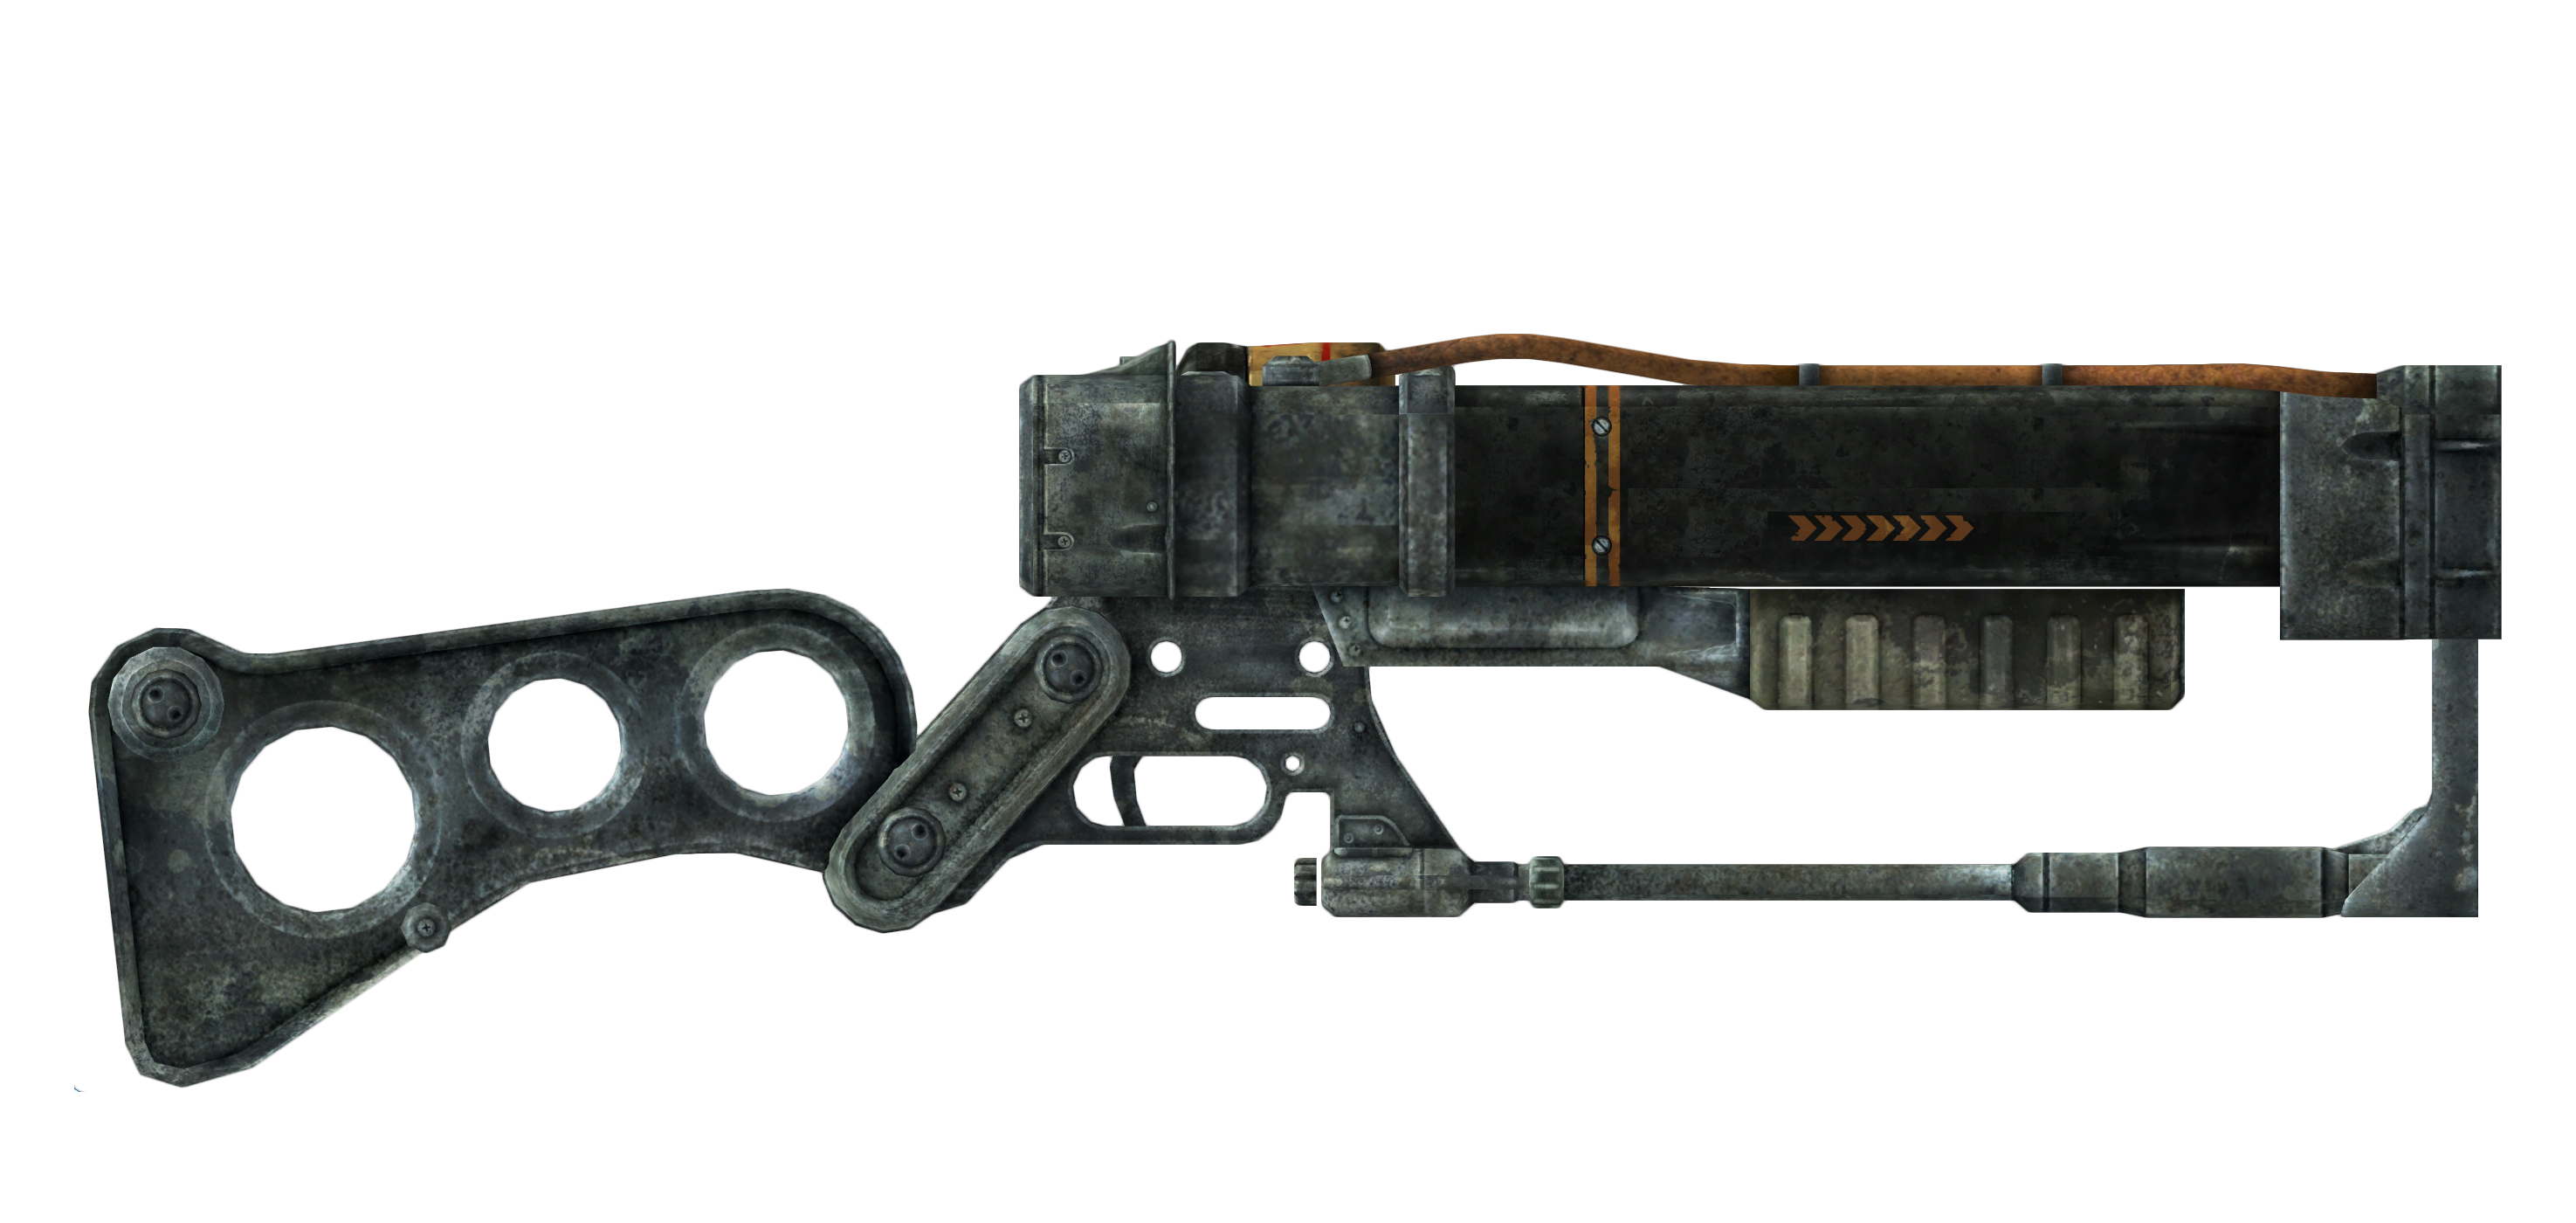 energy weapons fallout 3